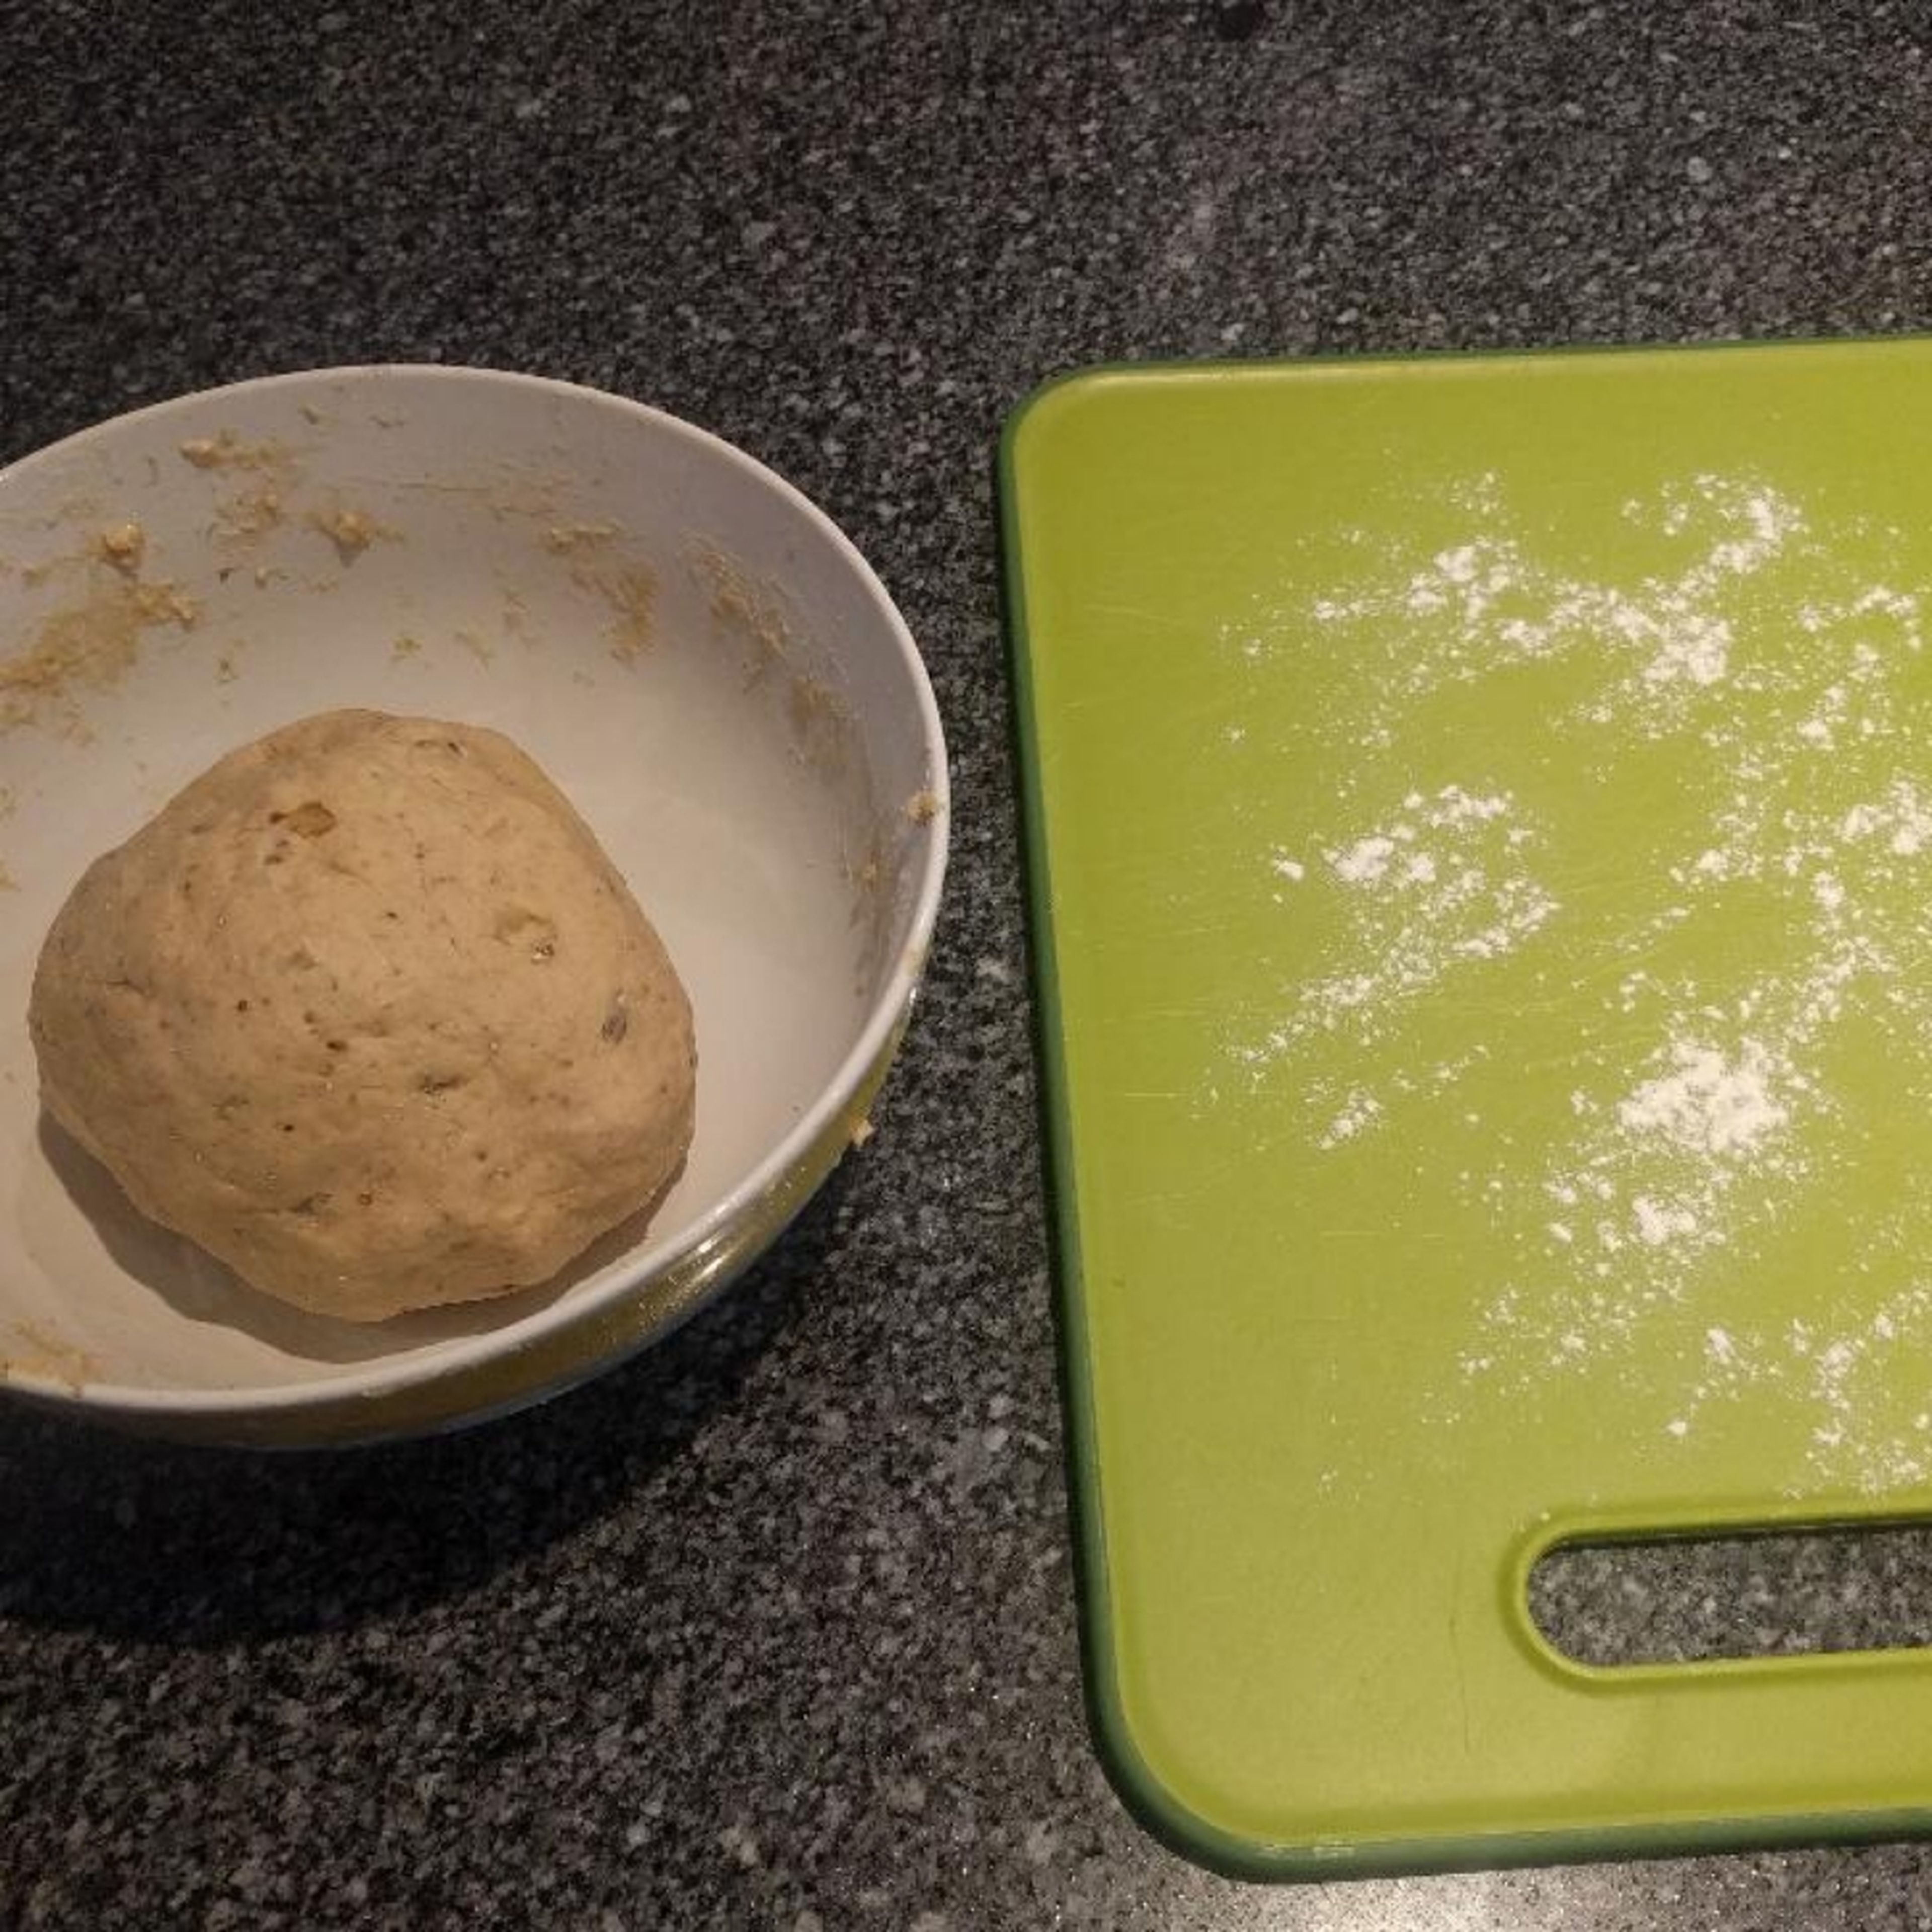 Once you can mould the dough into a small ball, let it rest for about five minutes. Prepare a large cutting board and cover the surface of the board with small amount of white flour. You may not need the flour if you feel the bread isn't sticking. After 5 minutes start molding and stretching the dough into the shape of bread (depending on you baking tray).